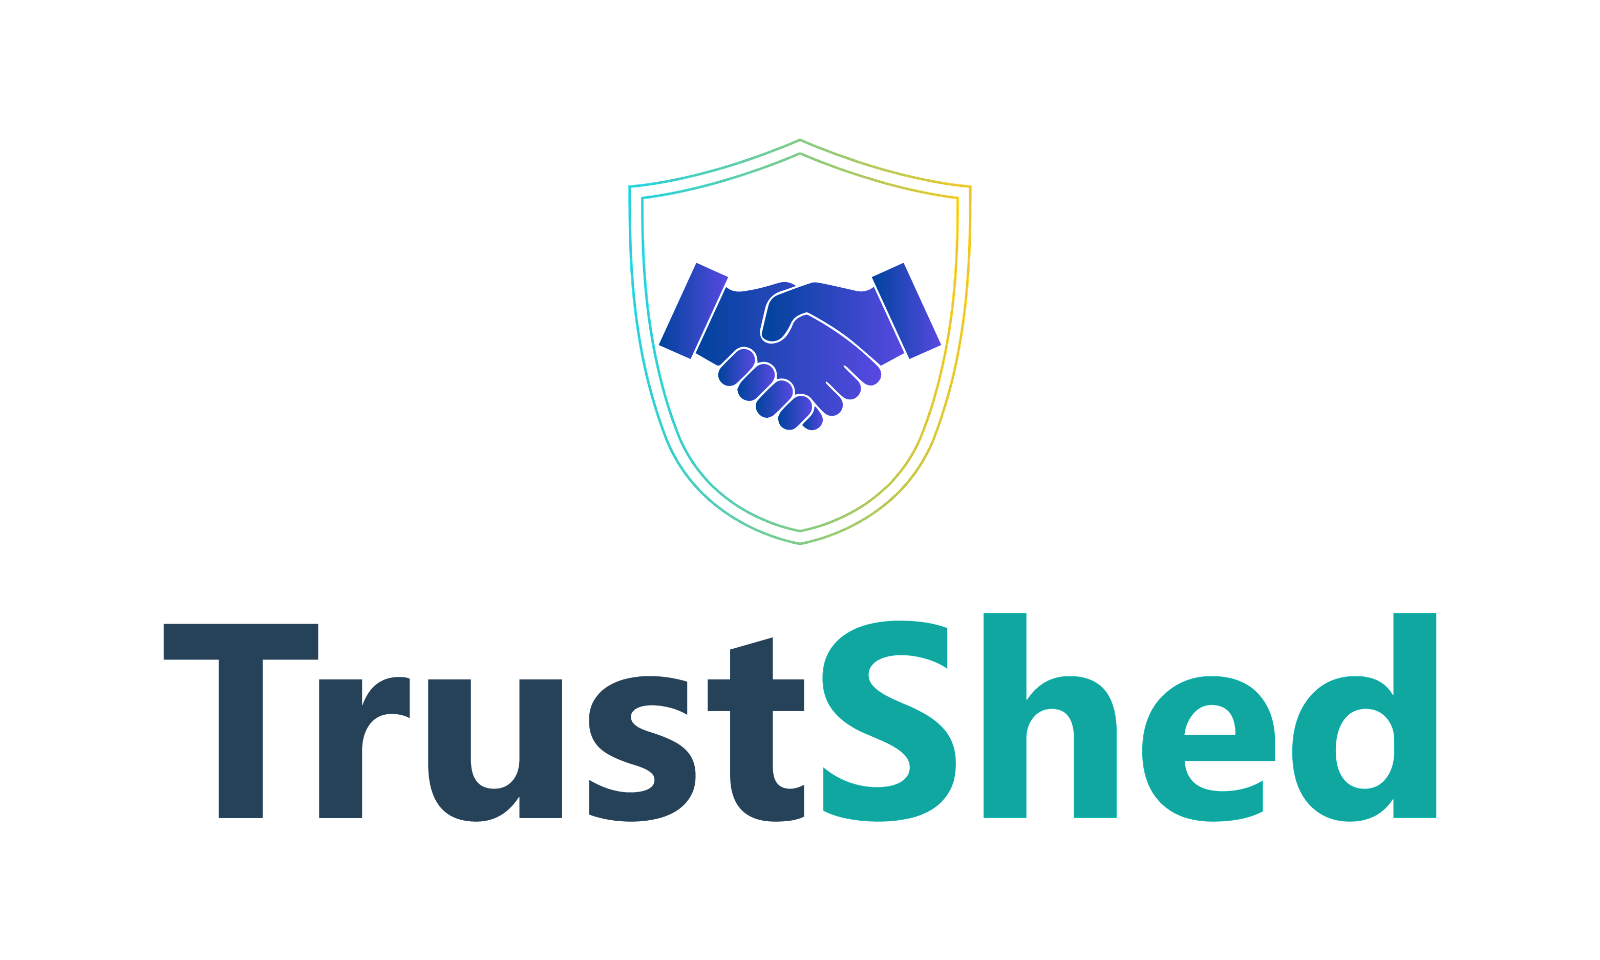 TrustShed.com - Creative brandable domain for sale